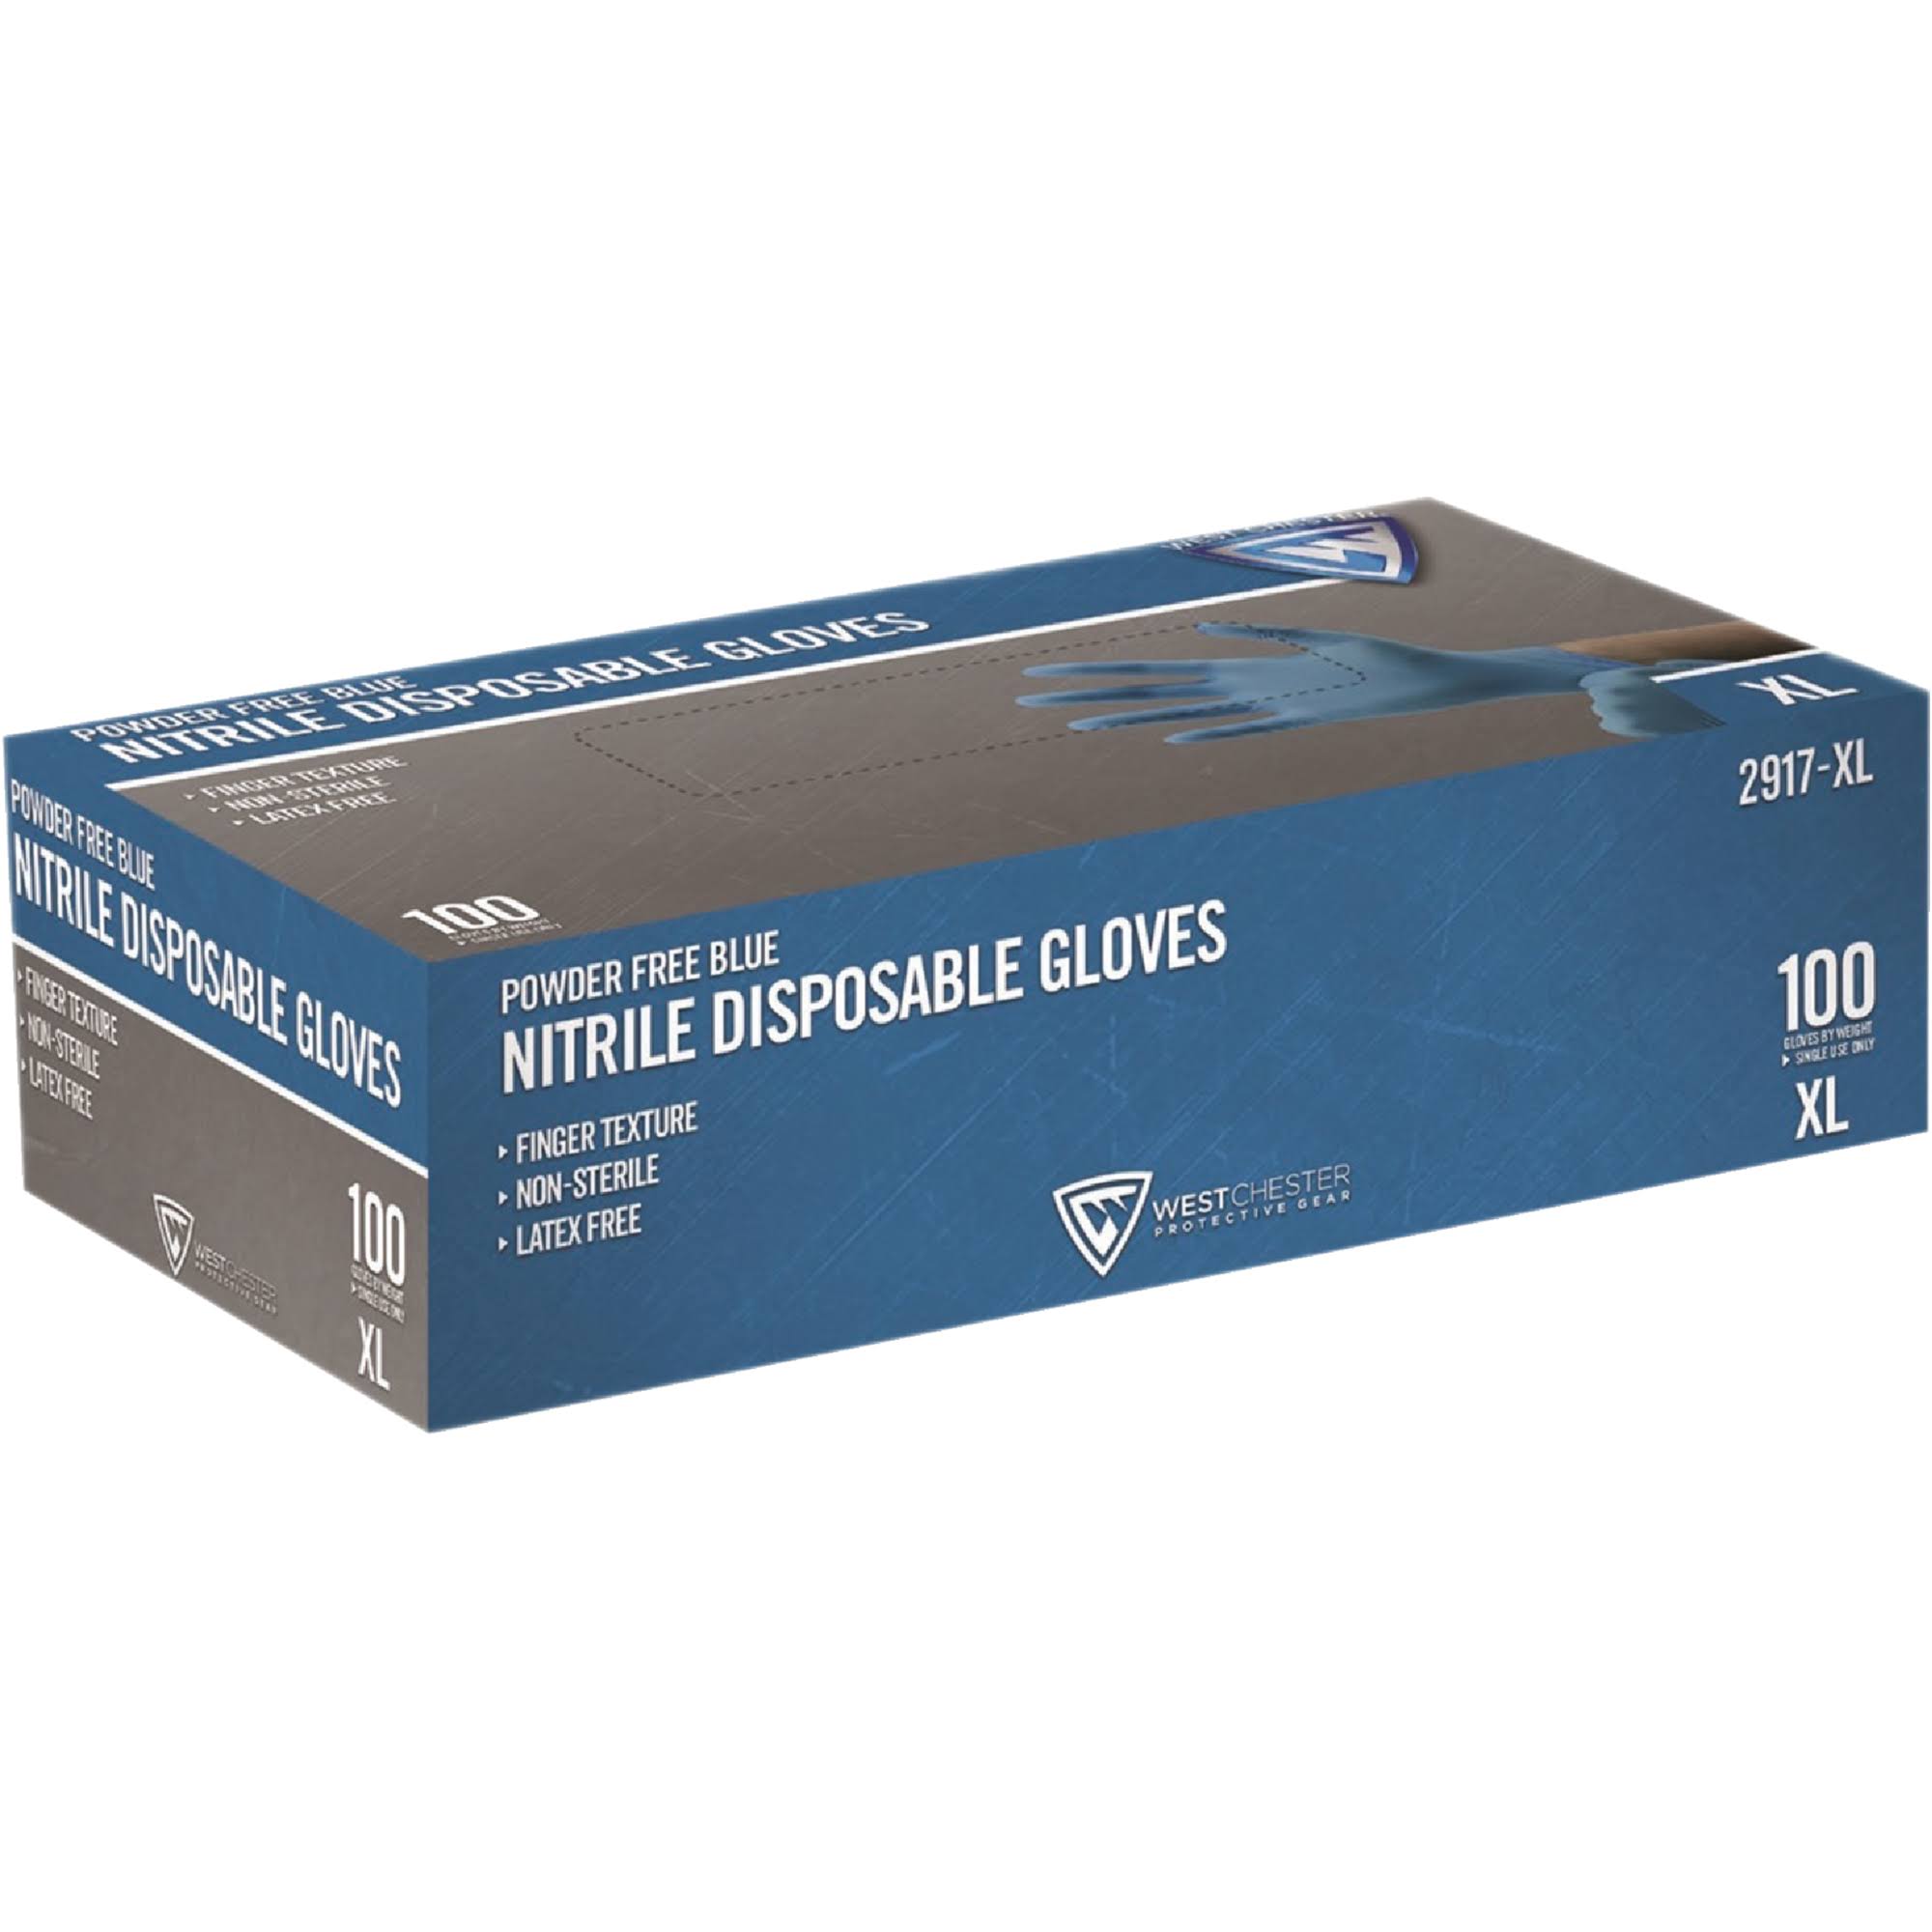 Powder-Free XL Blue Nitrile Disposable Gloves (100-Pack)